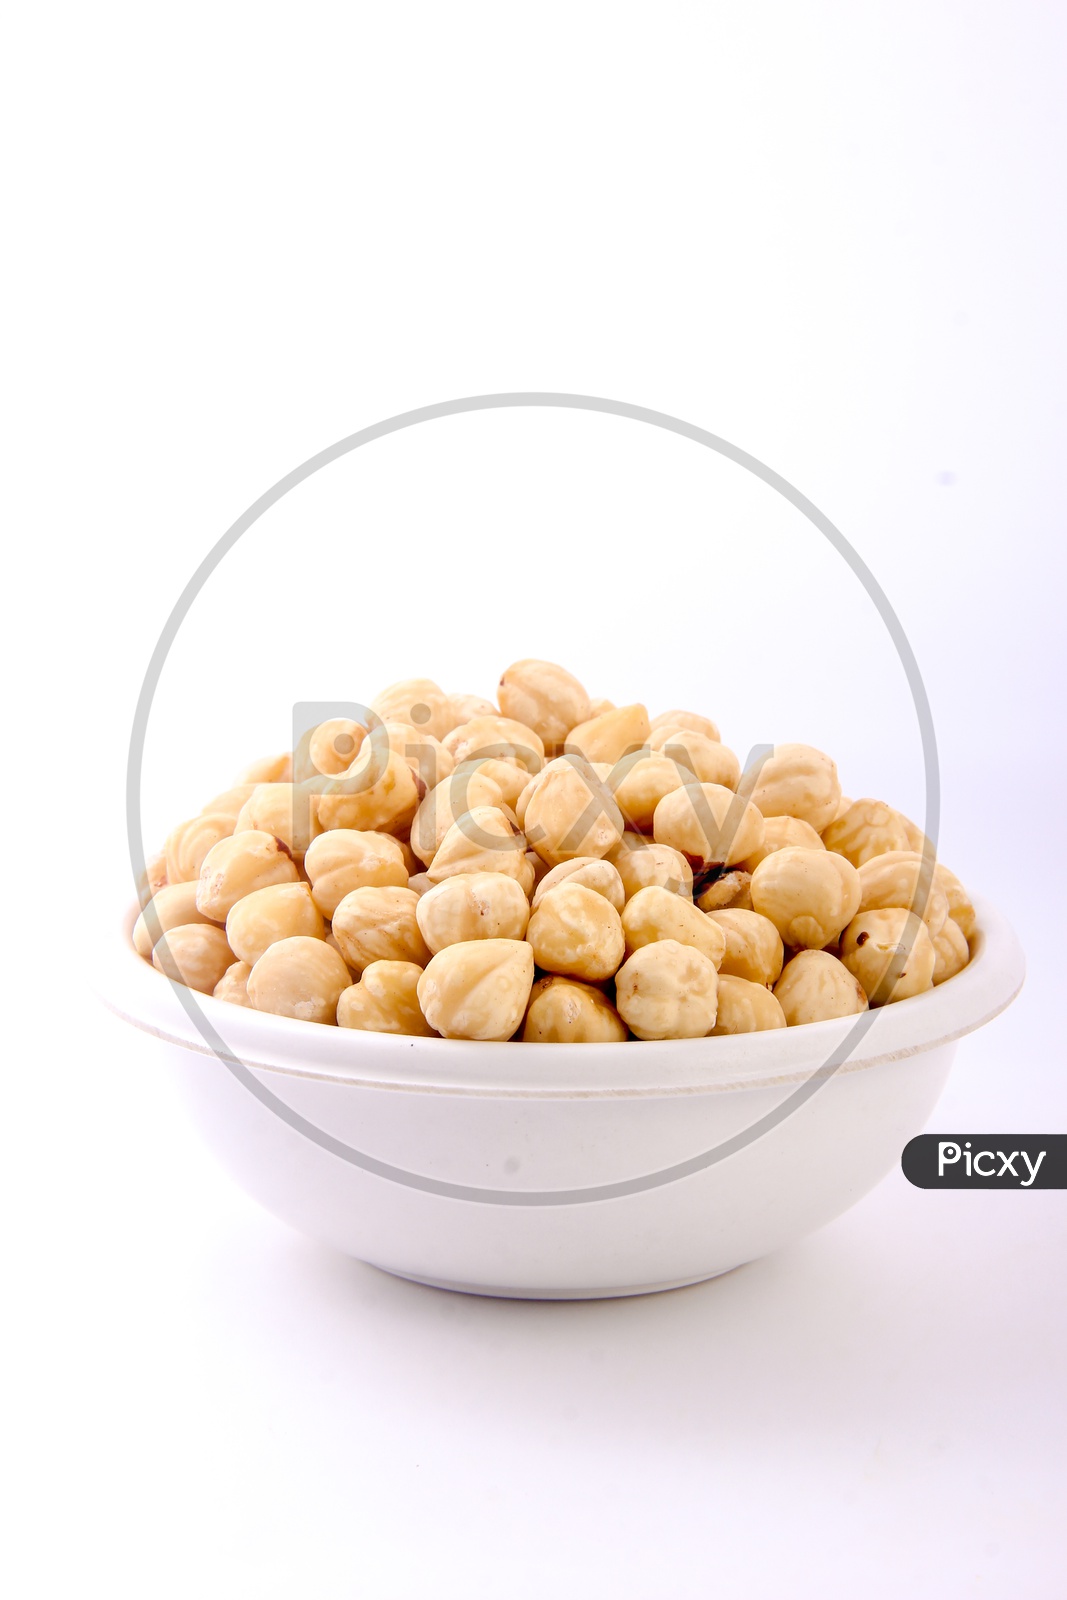 Chickpeas / Garbanzo Beans / Channa Dal / Kabuli Channa in a Bowl on an White Background